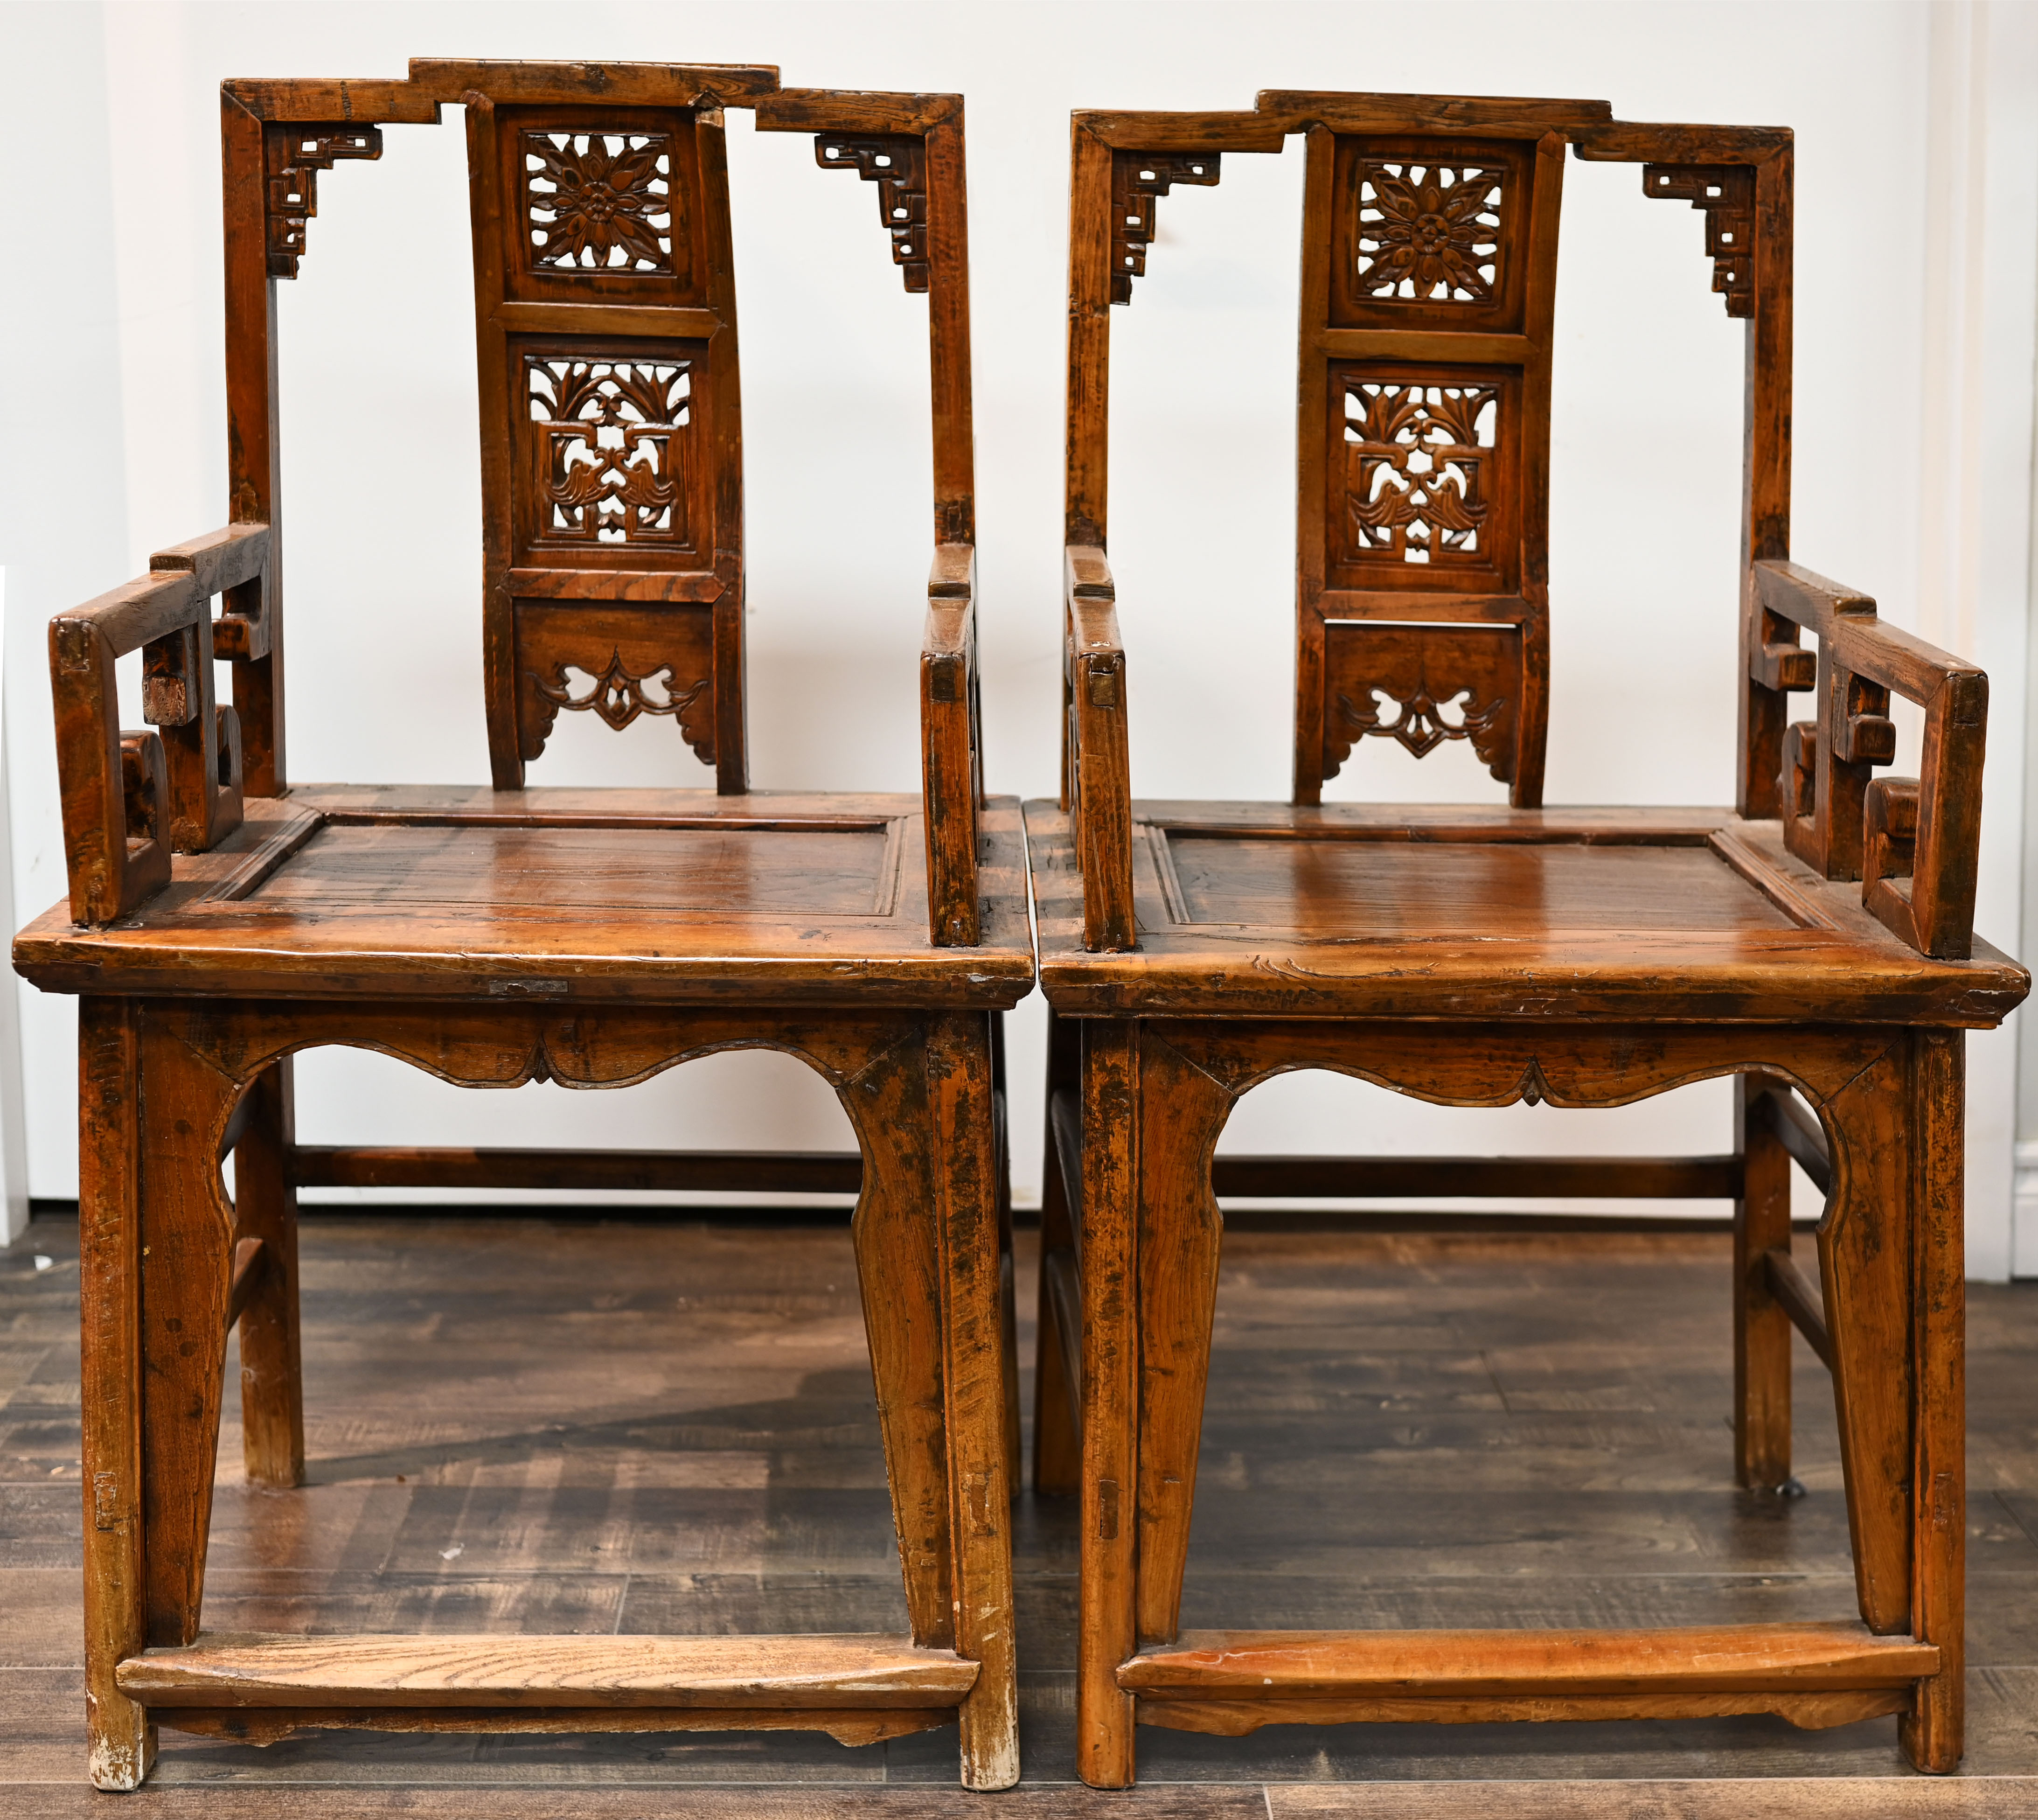 Pair of Hardwood Carved Chairs